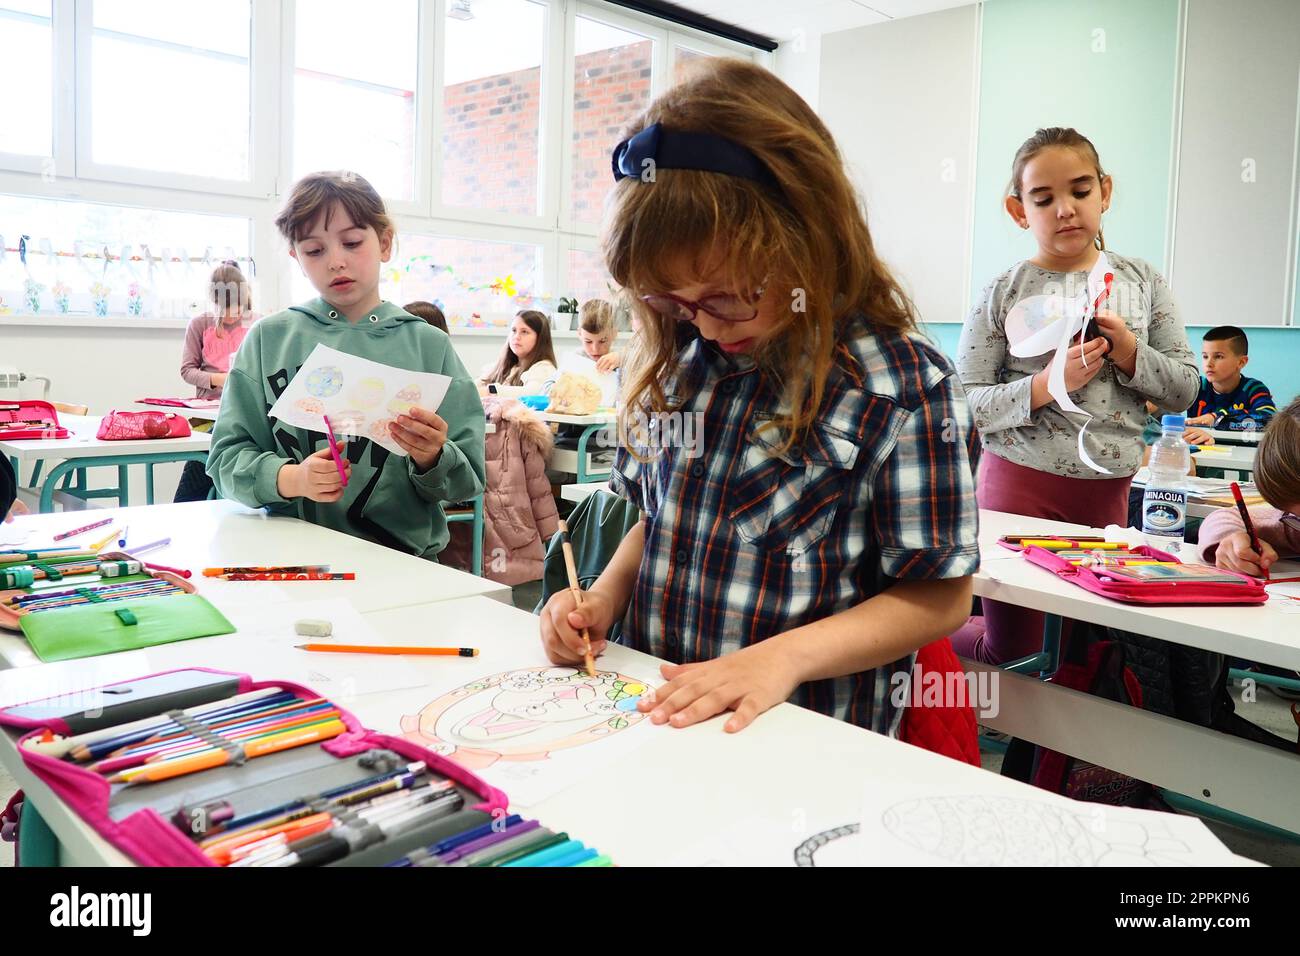 Children 9-10 years old, boys and girls, make homemade crafts at the lesson. Modern standards of education, development of creative abilities and fine motor skills at school April 9, 2022 Serbia Srem Stock Photo